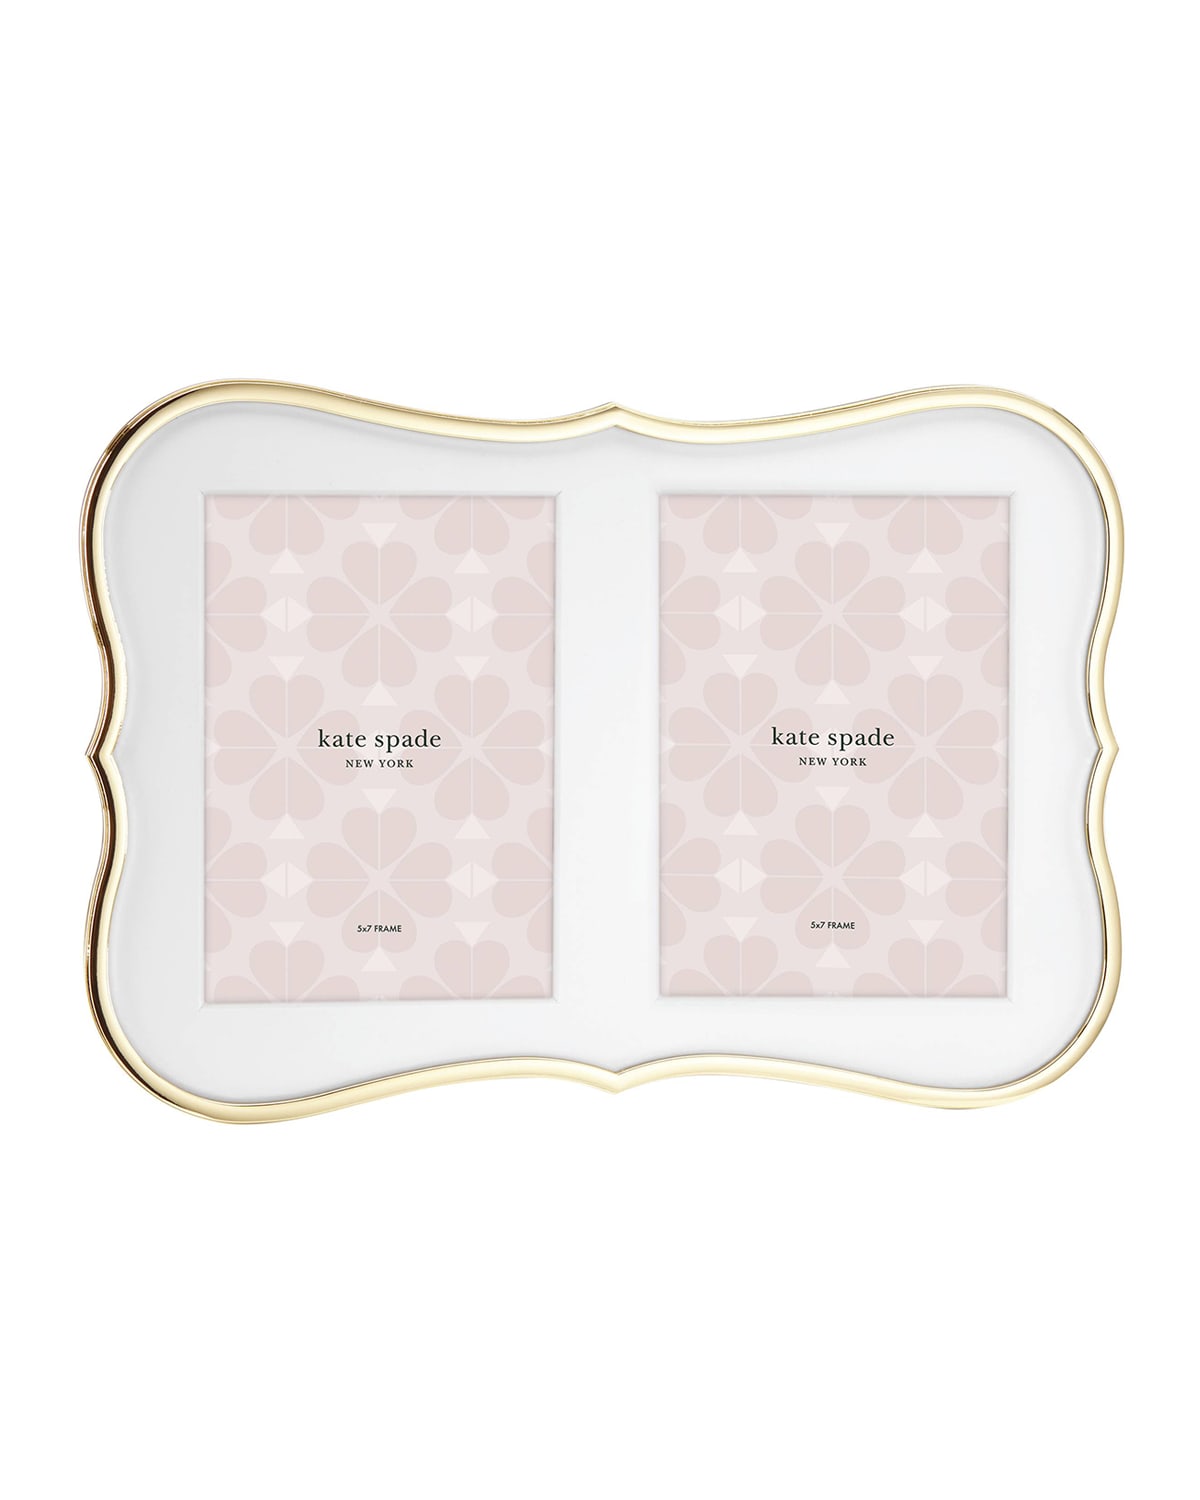 Image kate spade new york crown point double invitation picture frame